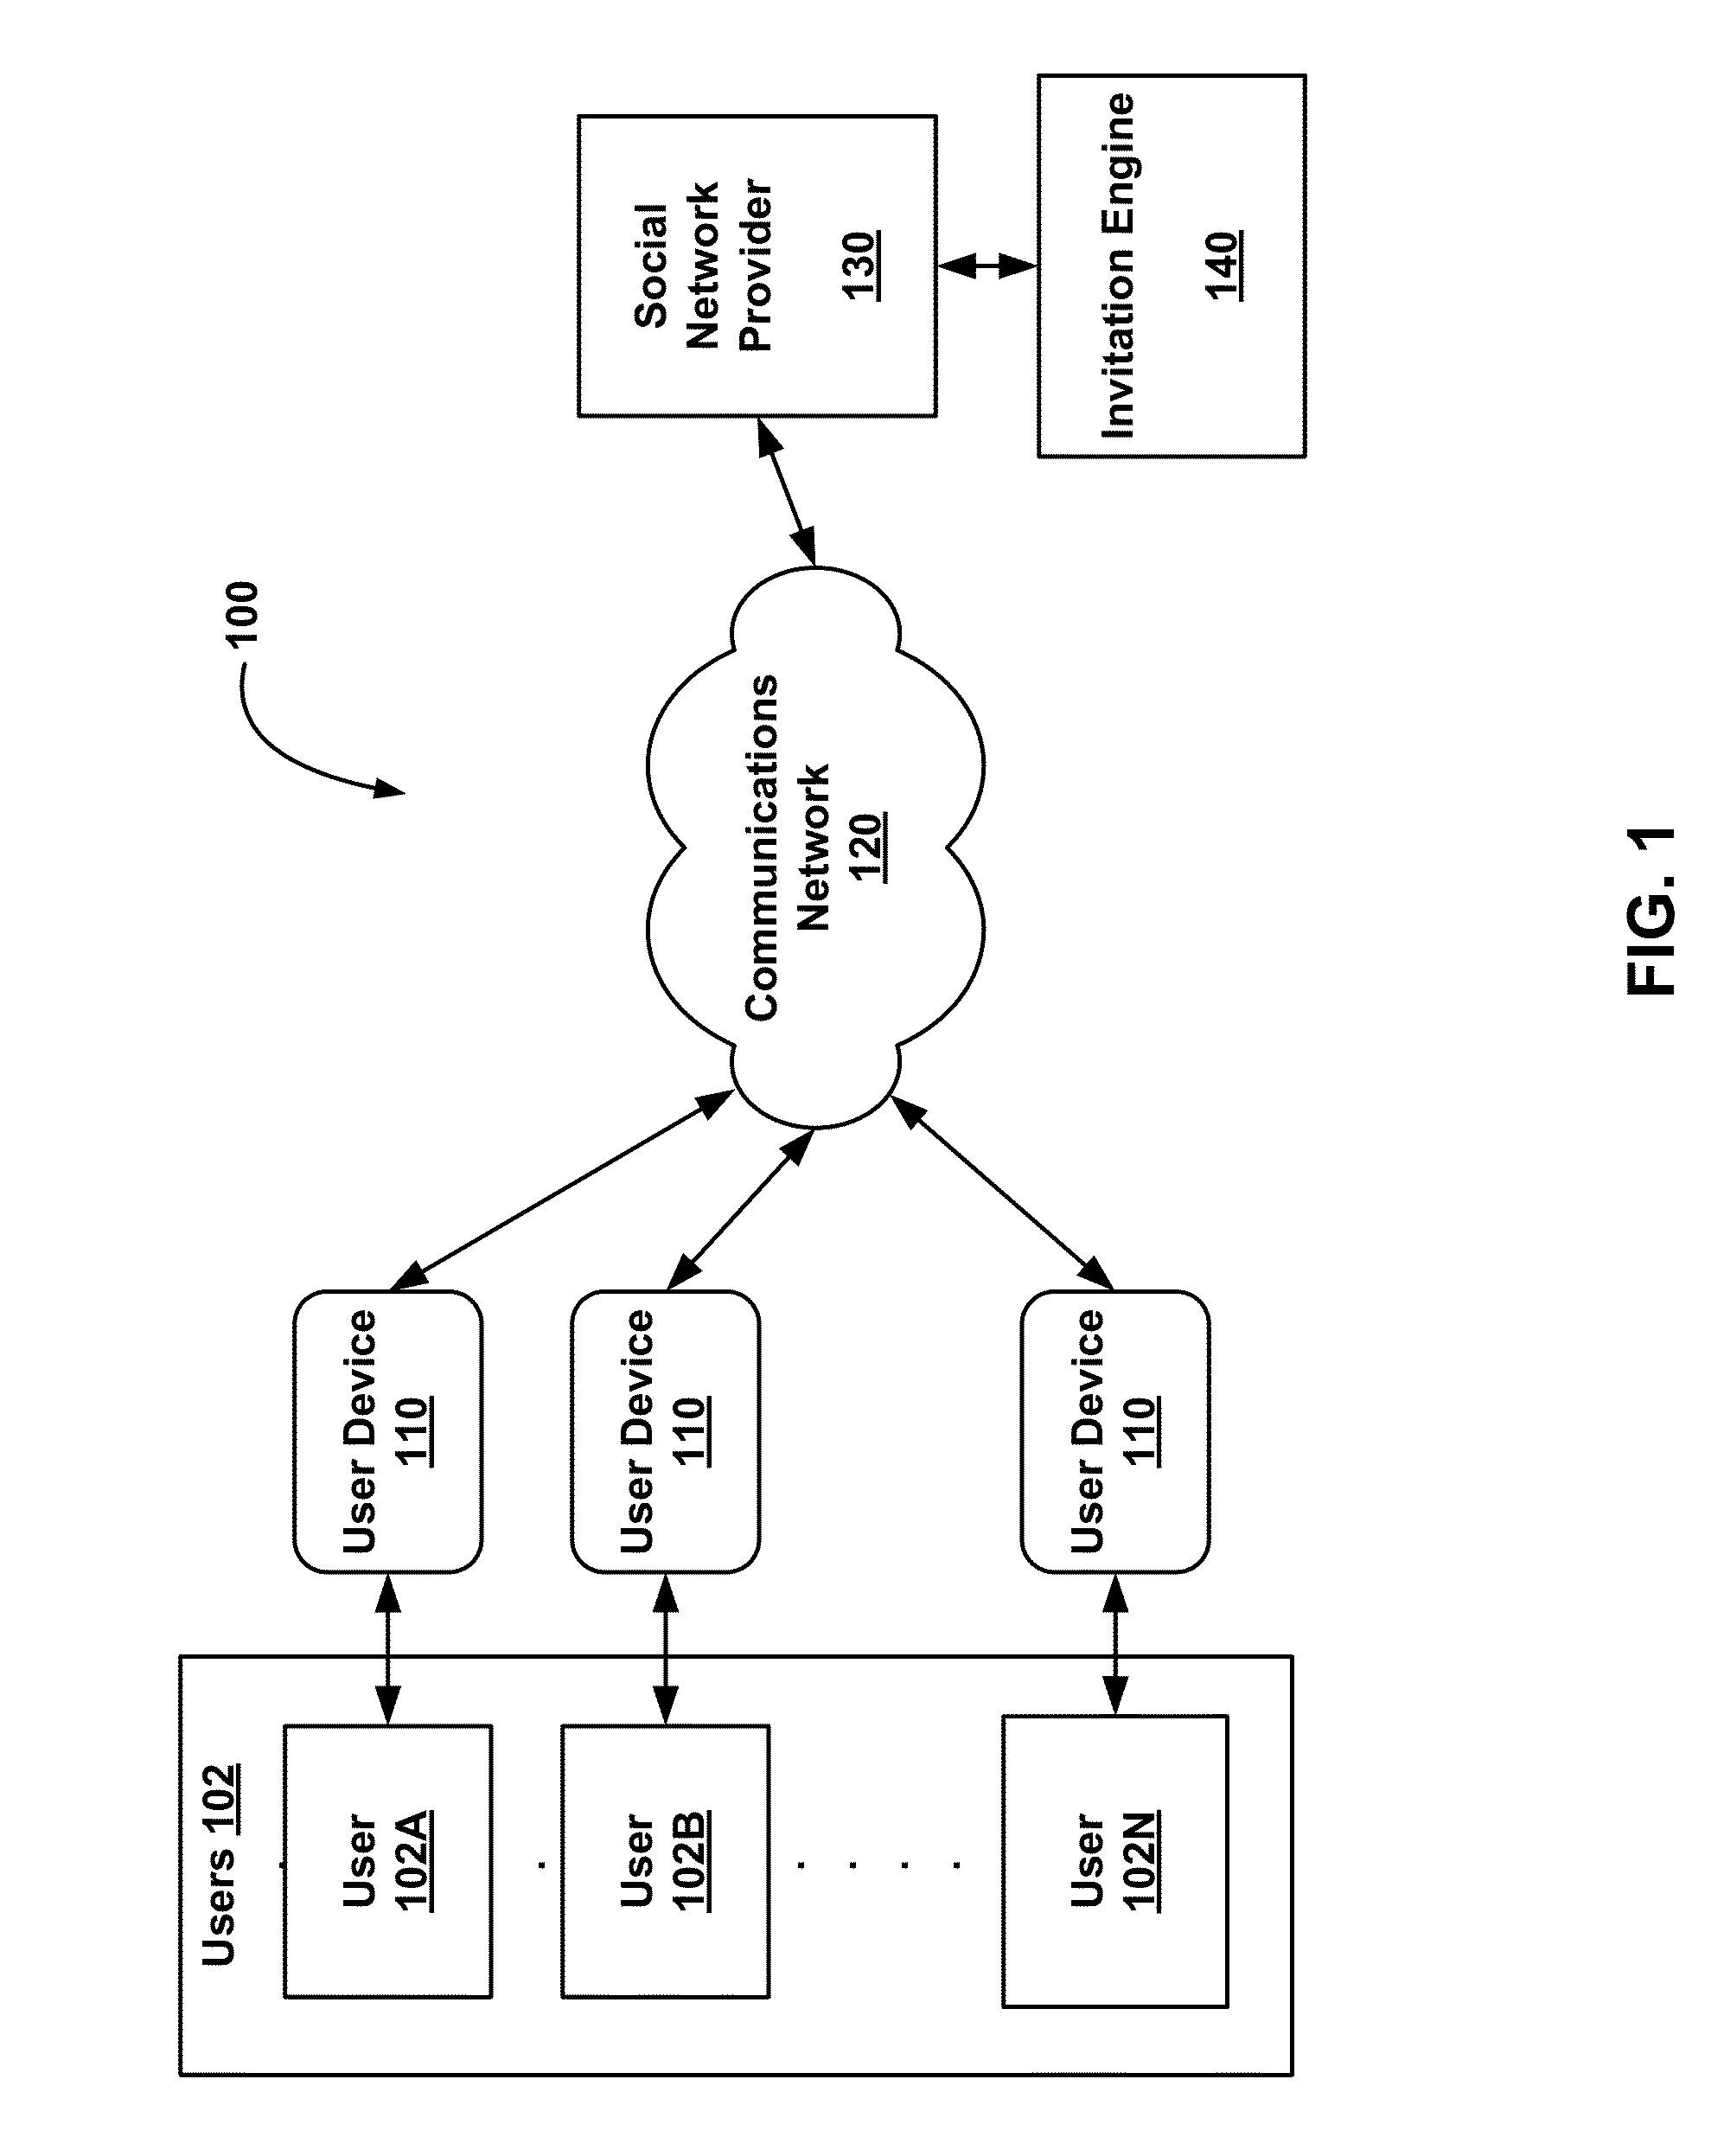 System And Method For Invitation Targeting In A Web-Based Social Network